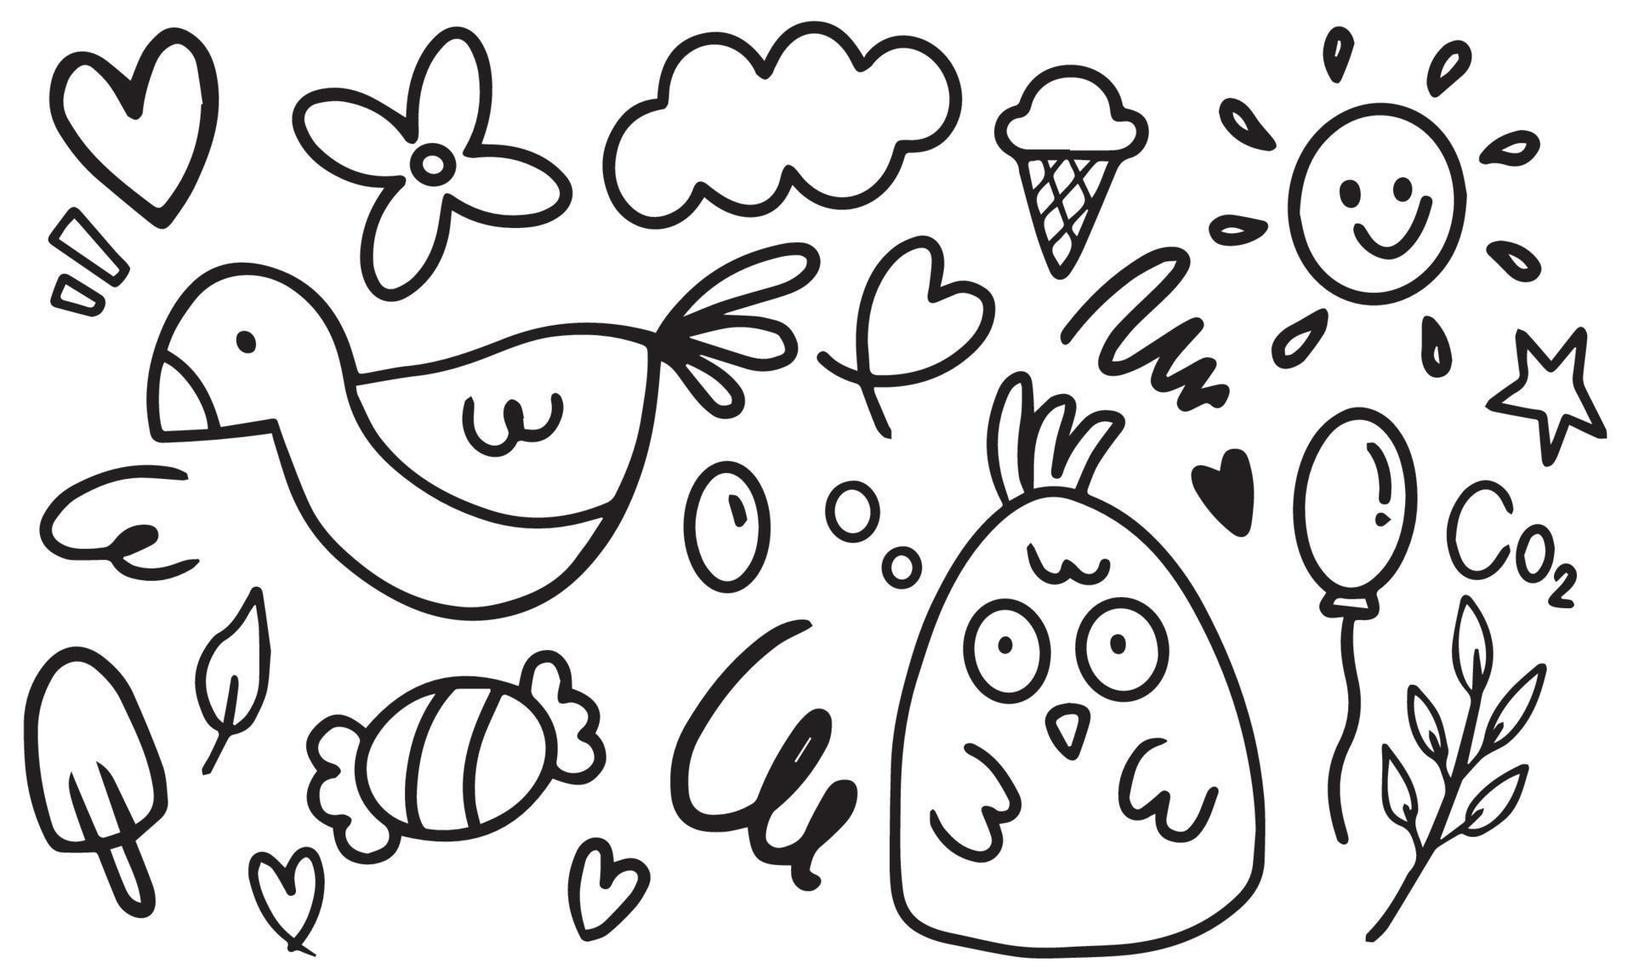 Set of doodle hand drawn. Elements of star, heart, cloud, sun, chicken, flower, spring etc. vector